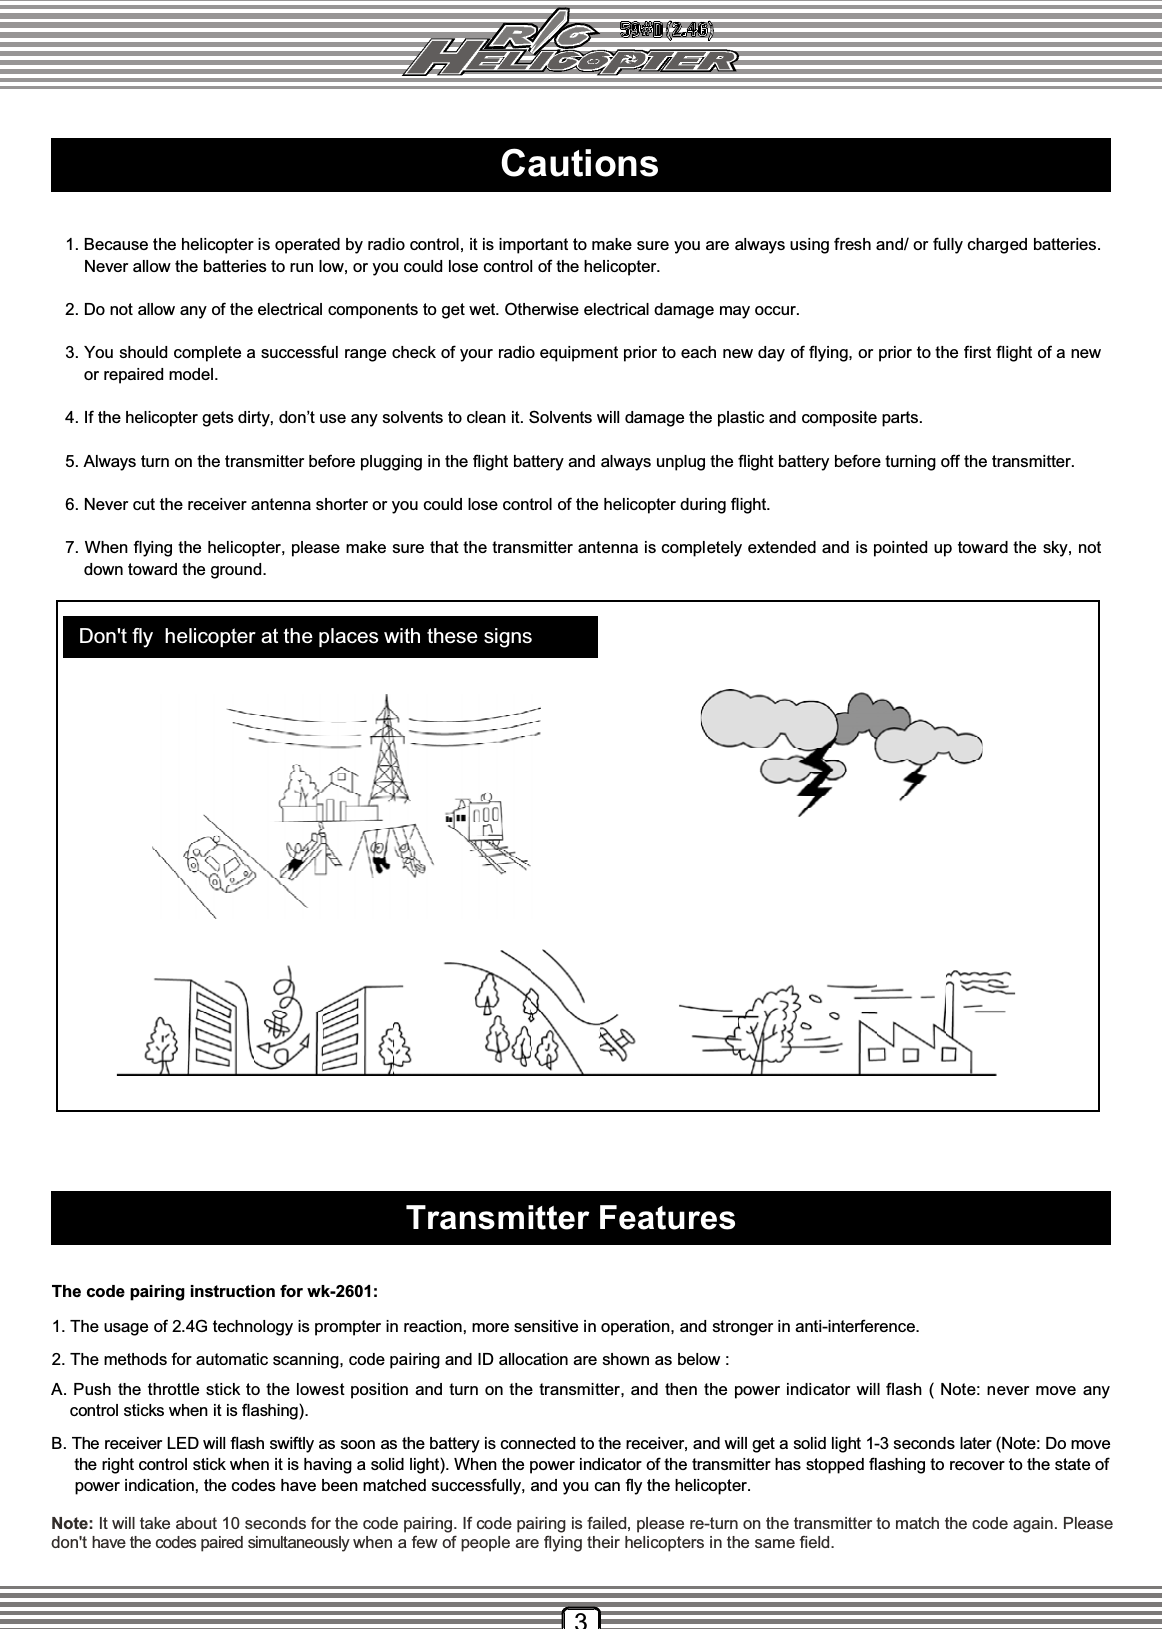 Cautions1. Because the helicopter is operated by radio control, it is important to make sure you are always using fresh and/ or fully charged batteries.  Never allow the batteries to run low, or you could lose control of the helicopter.2. Do not allow any of the electrical components to get wet. Otherwise electrical damage may occur.3. You should complete a successful range check of your radio equipment prior to each new day of flying, or prior to the first flight of a new  or repaired model.4. If the helicopter gets dirty, don’t use any solvents to clean it. Solvents will damage the plastic and composite parts.5. Always turn on the transmitter before plugging in the flight battery and always unplug the flight battery before turning off the transmitter.6. Never cut the receiver antenna shorter or you could lose control of the helicopter during flight.7. When flying the helicopter, please make sure that the transmitter antenna is completely extended and is pointed up toward the sky, not  down toward the ground.3Note: It will take about 10 seconds for the code pairing. If code pairing is failed, please re-turn on the transmitter to match the code again. Pleasedon&apos;t have the codes paired simultaneously when a few of people are flying their helicopters in the same field.Don&apos;t fly helicopter at the places with these signsTransmitter FeaturesThe code pairing instruction for wk-2601:A. Push the throttle stick to the lowest position and turn on the transmitter, and then the power indicator will flash ( Note: never move any    control sticks when it is flashing).1. The usage of 2.4G technology is prompter in reaction, more sensitive in operation, and stronger in anti-interference.2. The methods for automatic scanning, code pairing and ID allocation are shown as below :B. The receiver LED will flash swiftly as soon as the battery is connected to the receiver, and will get a solid light 1-3 seconds later (Note: Do move the right control stick when it is having a solid light). When the power indicator of the transmitter has stopped flashing to recover to the state of   power indication, the codes have been matched successfully, and you can fly the helicopter.